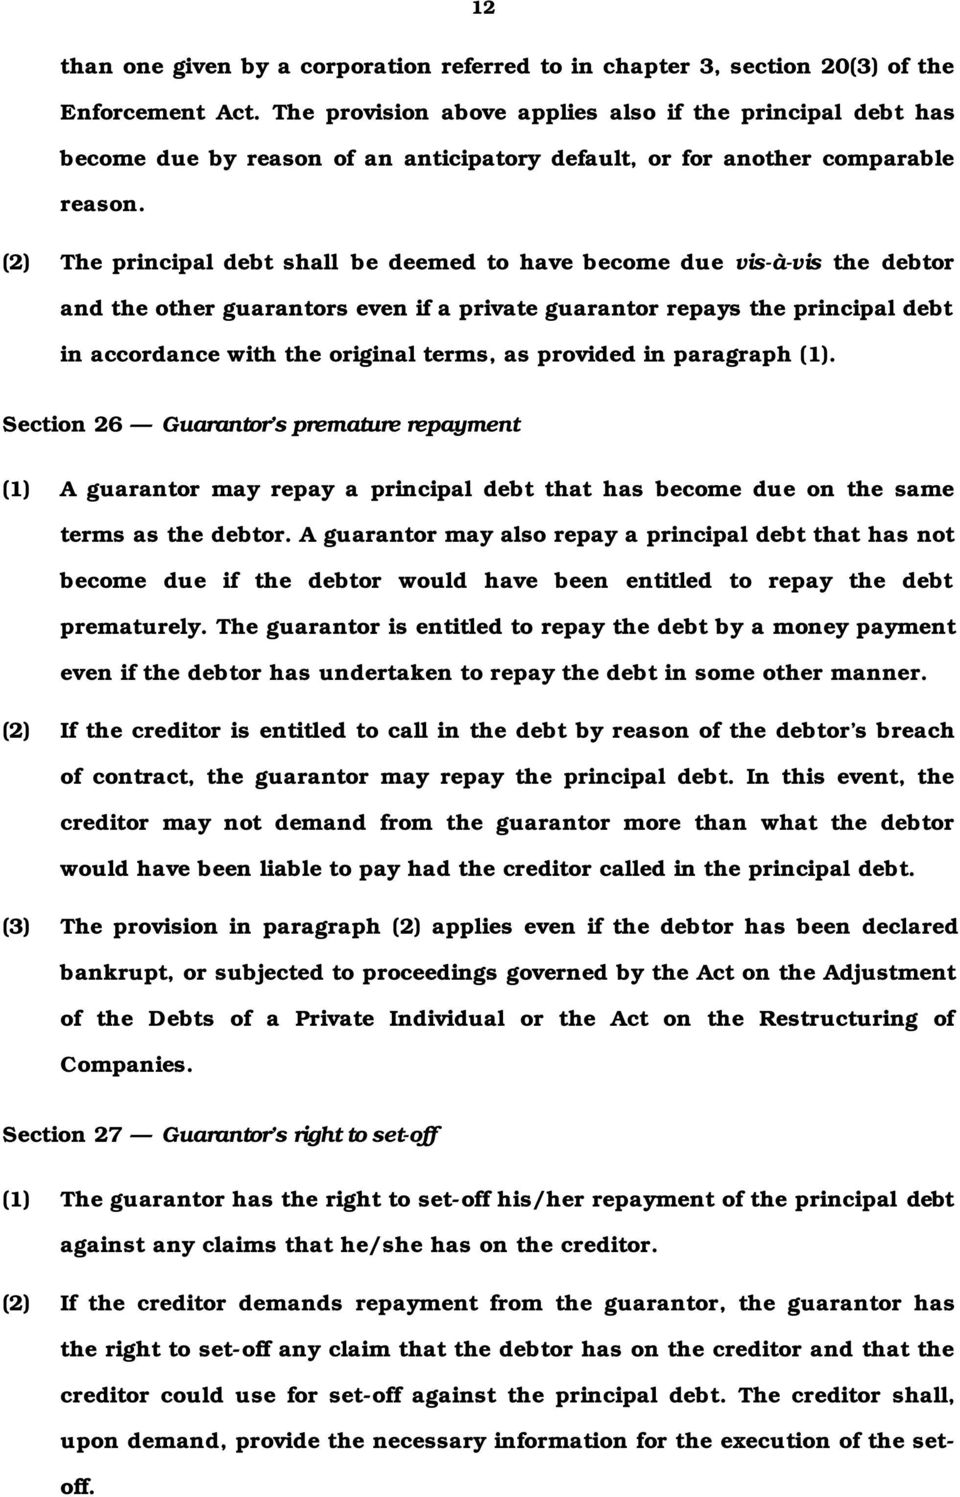 (2) The principal debt shall be deemed to have become due vis-à-vis the debtor and the other guarantors even if a private guarantor repays the principal debt in accordance with the original terms, as